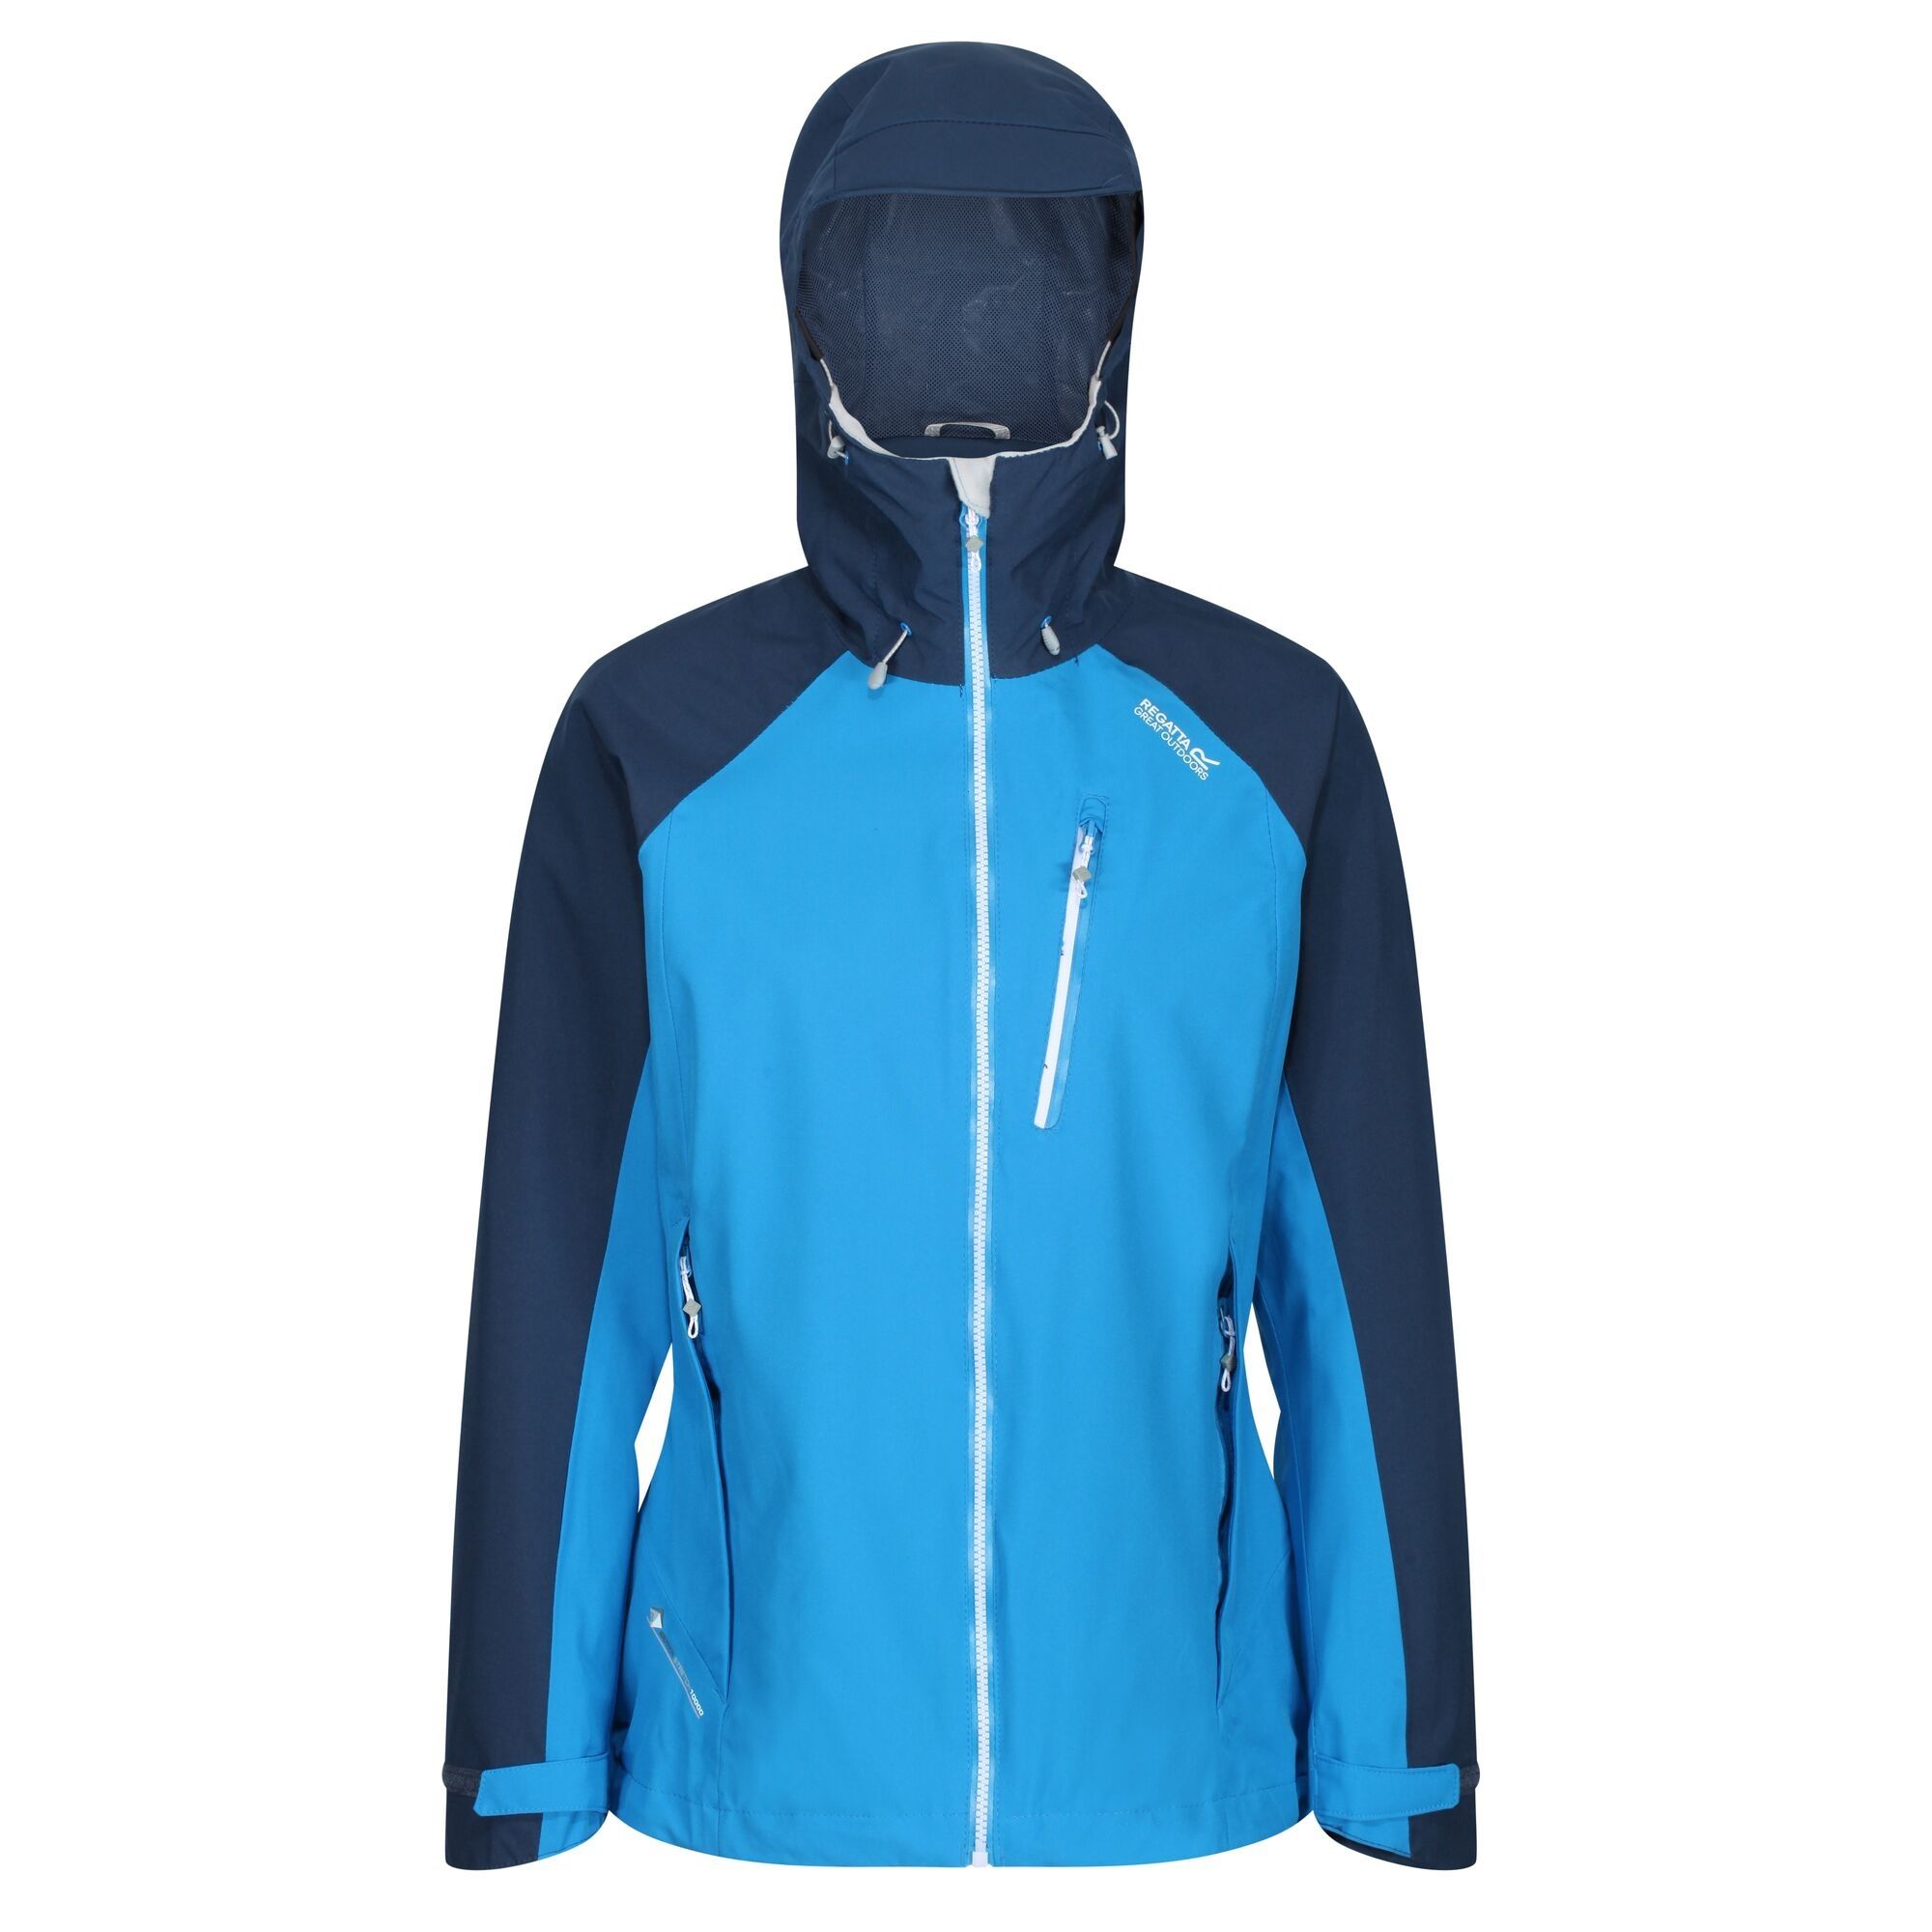 100% Polyester. Clean cut full stretch ISOTEX 10,000 shell jacket. Waterproof and breathable protection. Taped seams. Durable water repellent. Peaked hood with adjusters. Shockcord hem.